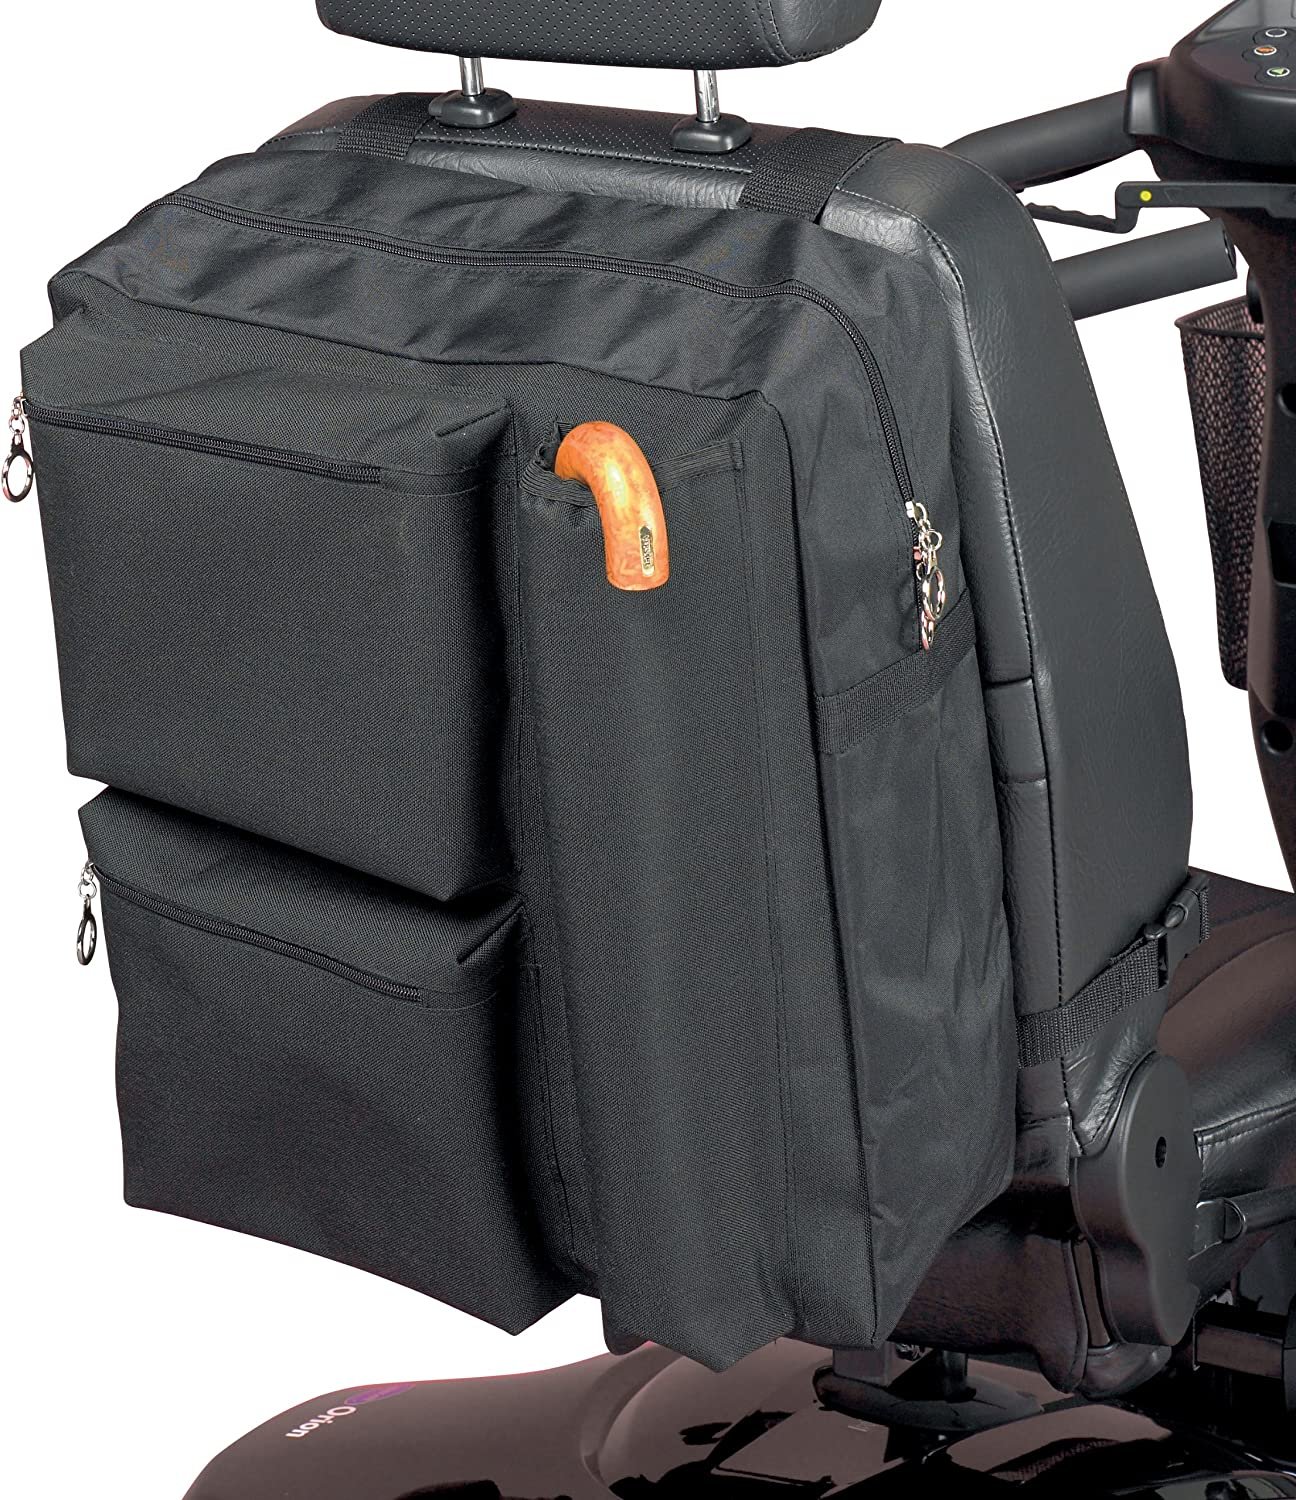 High-quality scooter storage bag with padding for securely transporting and storing your scooter and its contents.